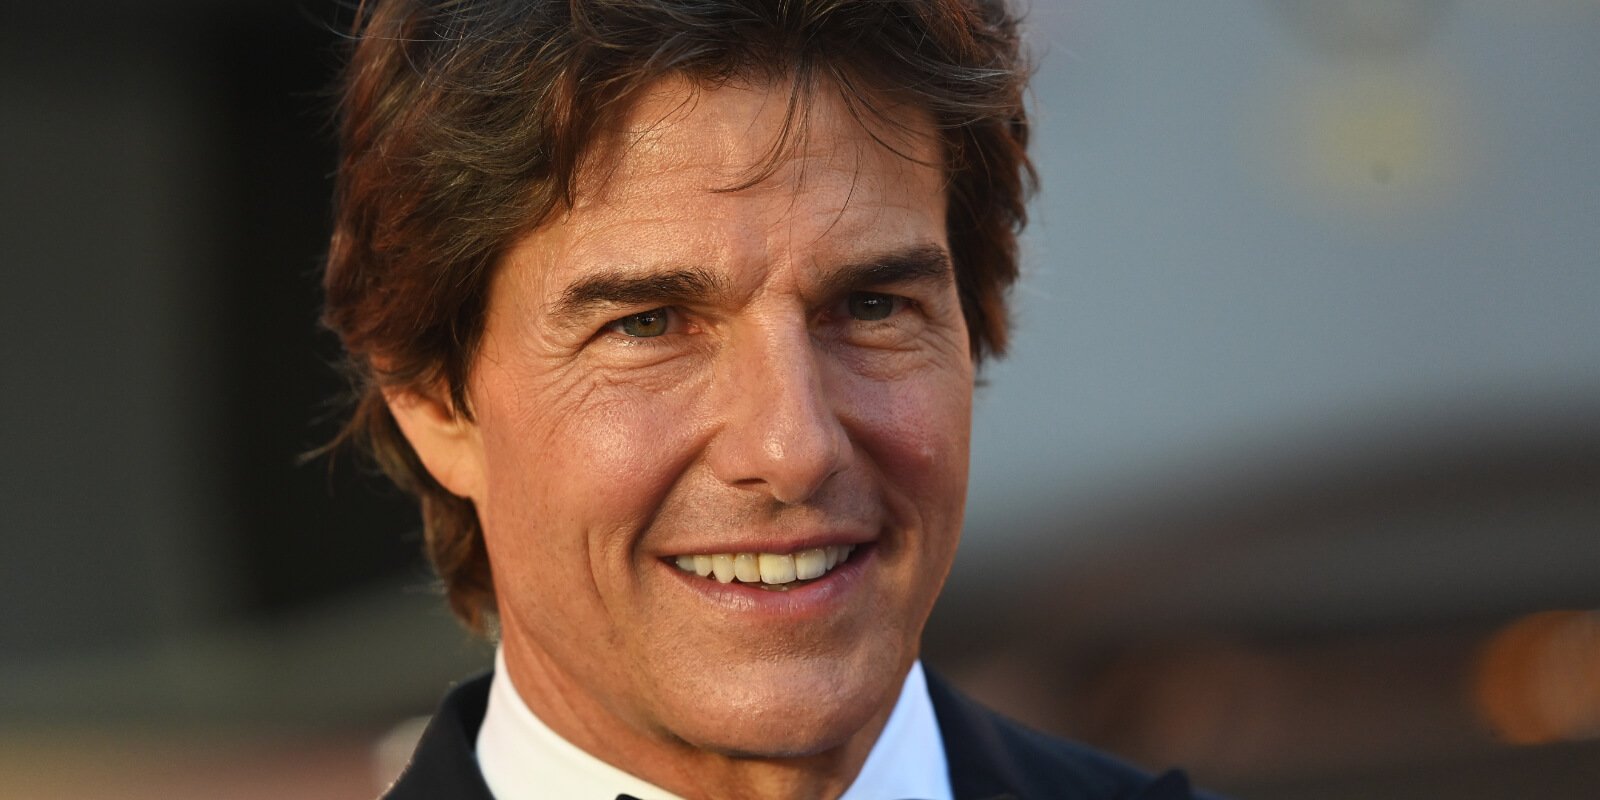 Tom Cruise at the London premiere of Top Gun: Maverick which was attended by Kate Middleton and Prince William.